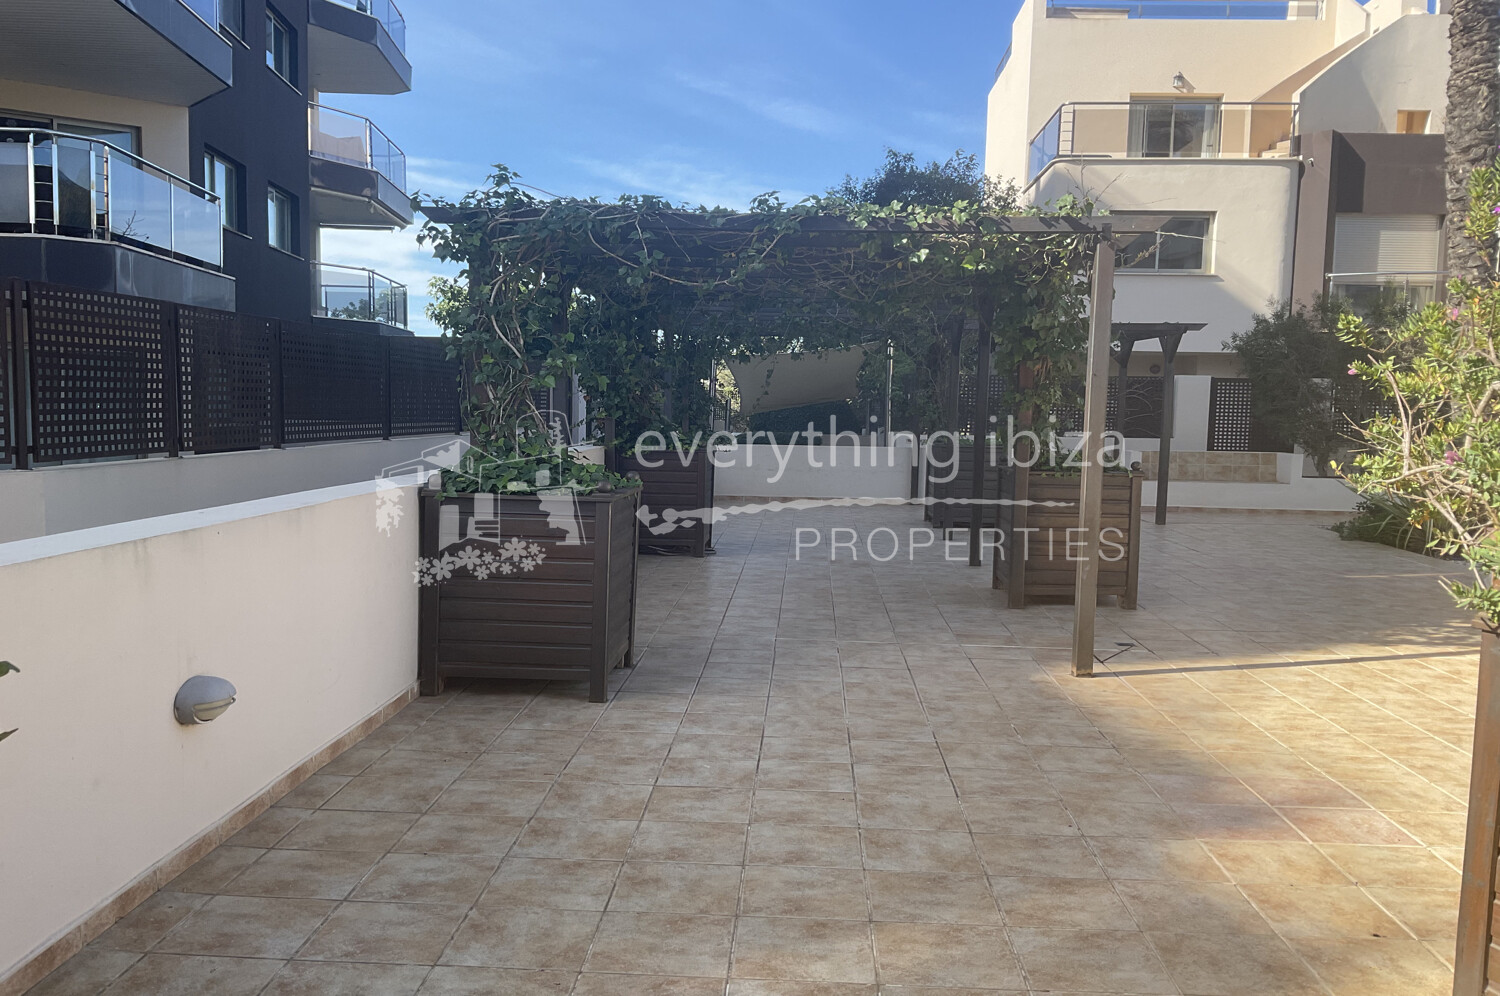 Delightful Contemporary Apartment Very Near Beach in Central Santa Eulalia, ref. 1675, for sale in Ibiza by everything ibiza Properties